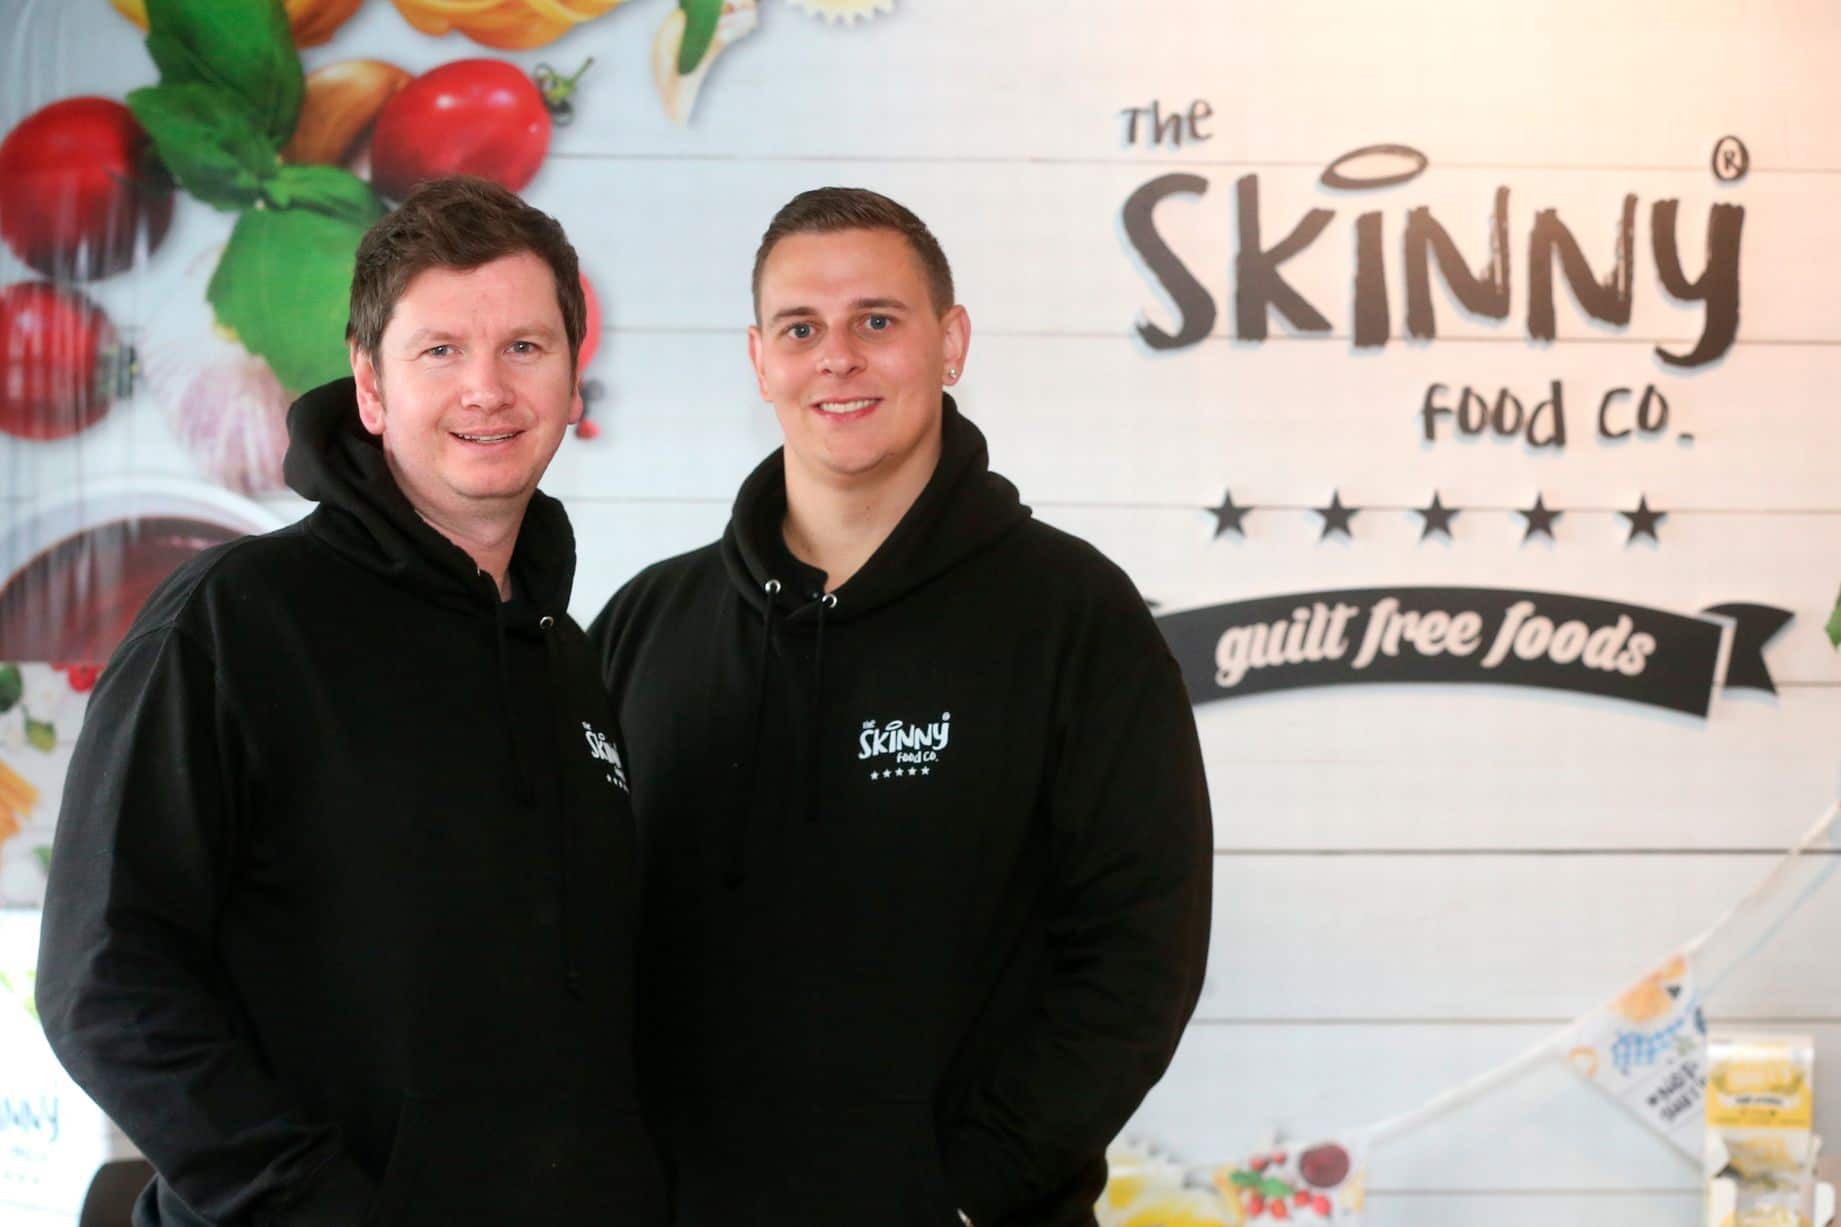 Wayne Starkey (left) & James Whiting (right) - The Skinny Food Co. co-founders